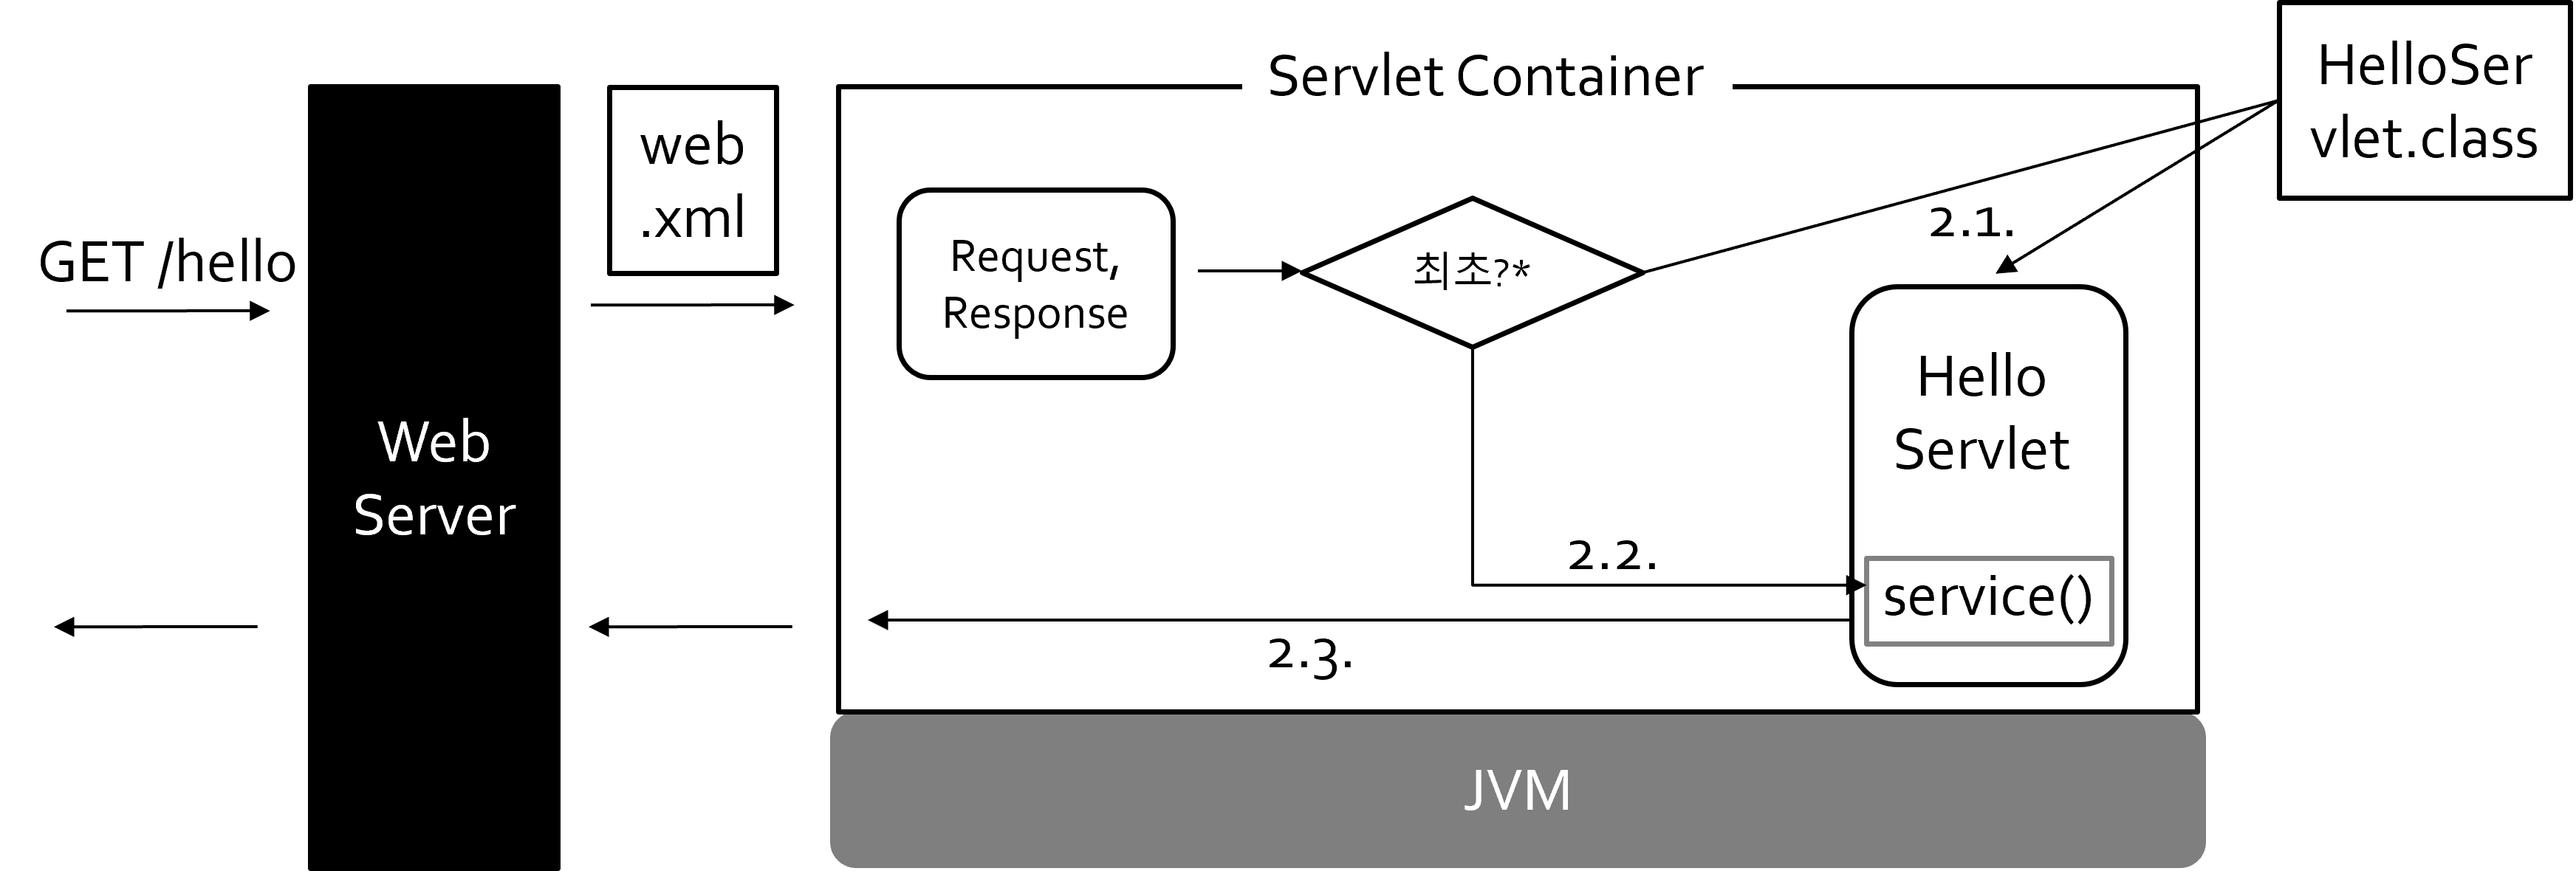 servlet-lifecycle-request-response